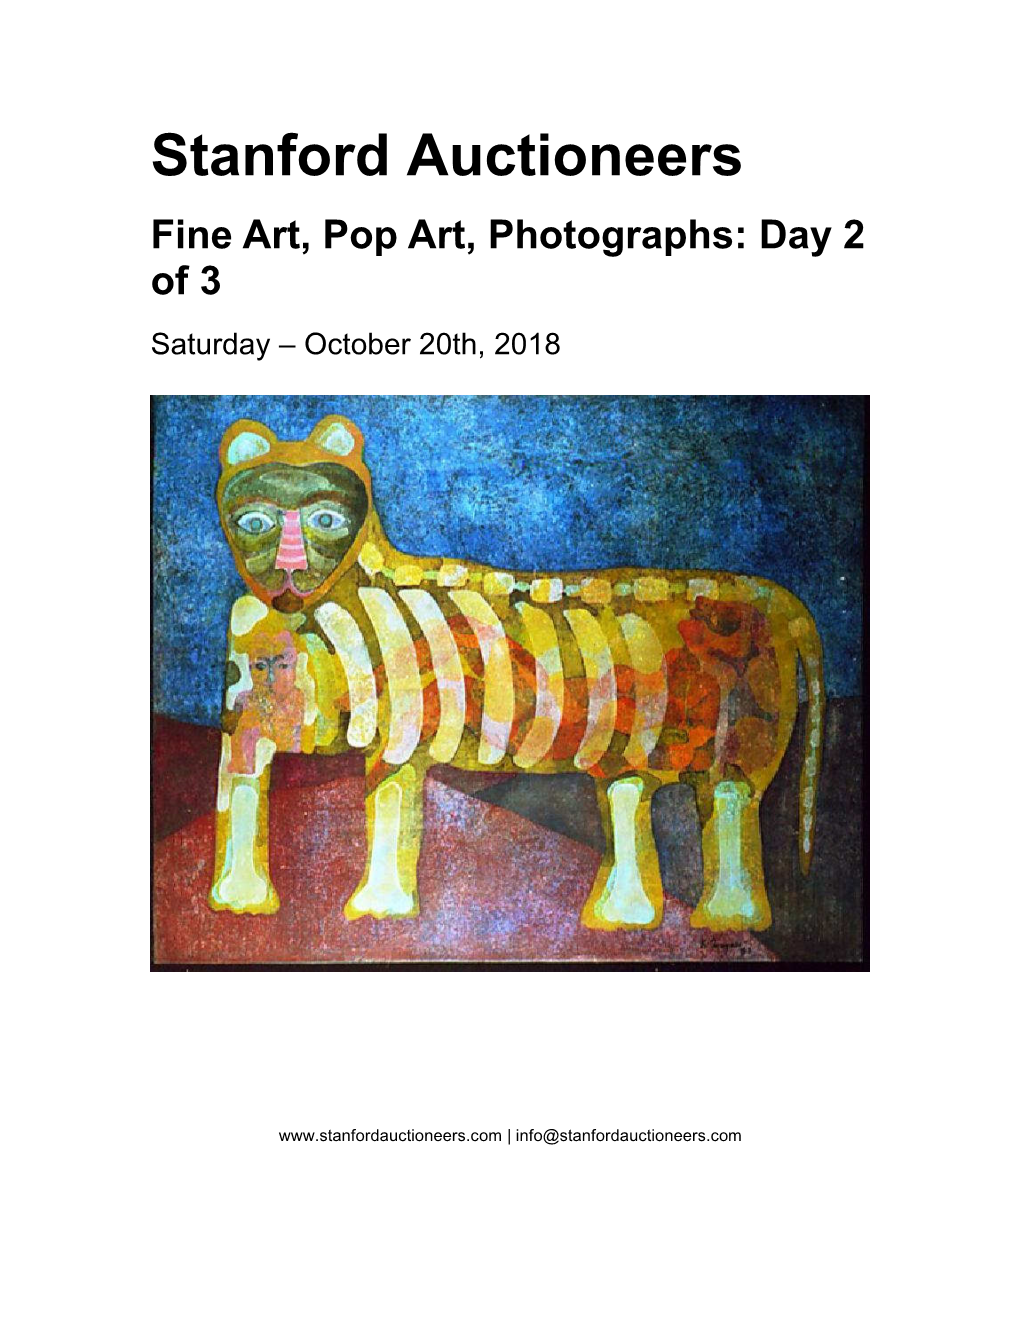 Stanford Auctioneers Fine Art, Pop Art, Photographs: Day 2 of 3 Saturday – October 20Th, 2018